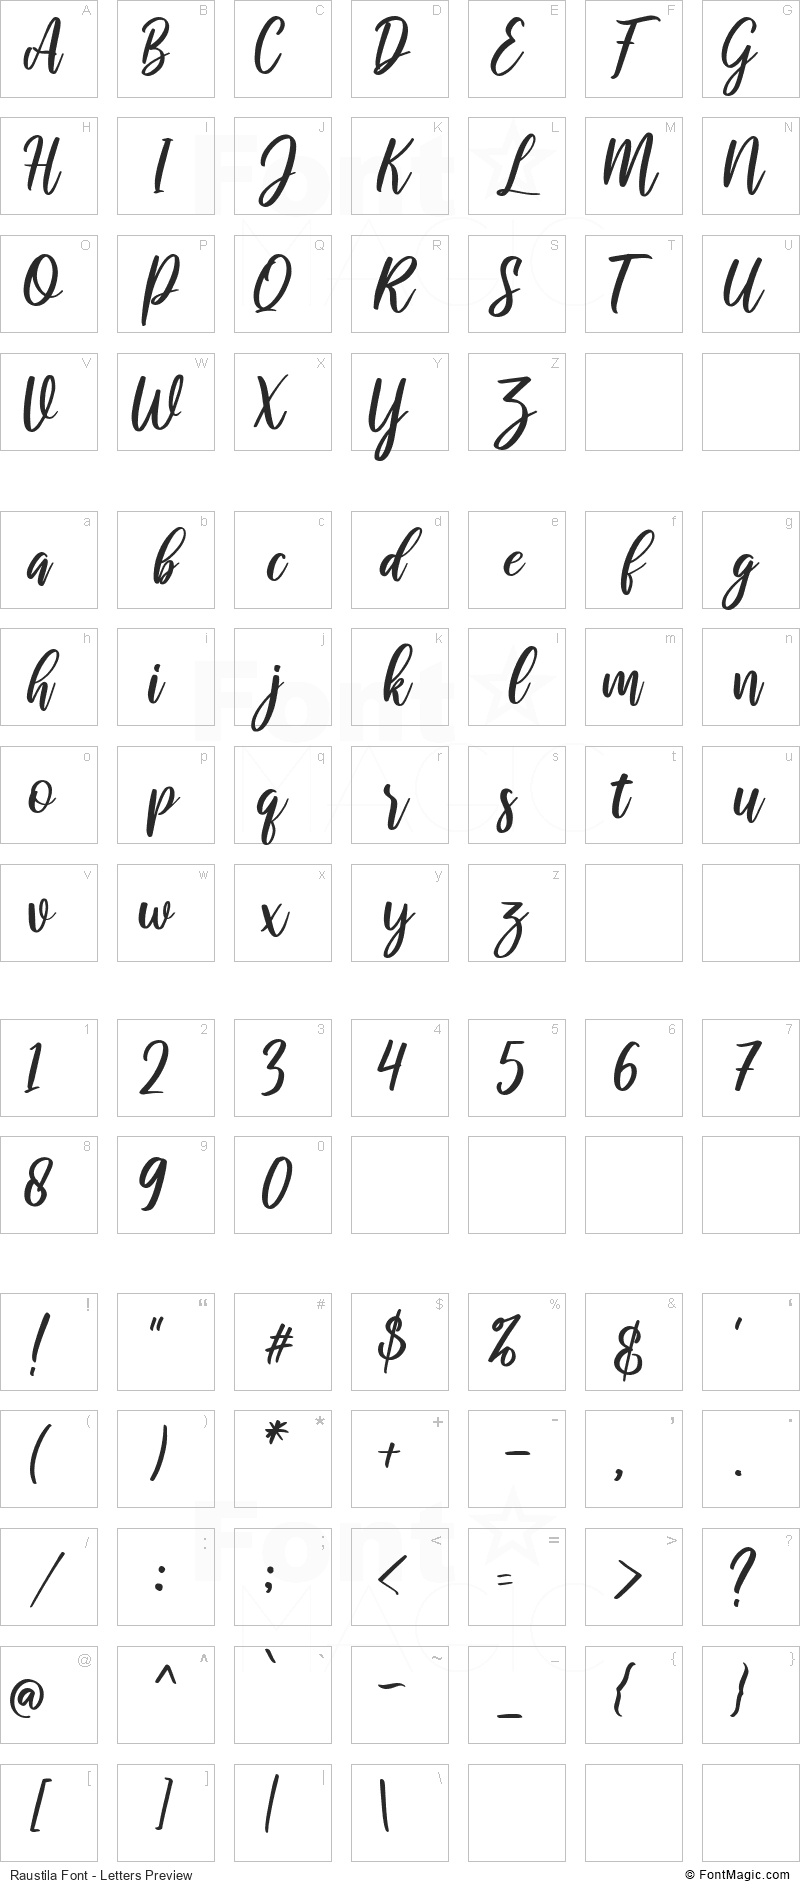 Raustila Font - All Latters Preview Chart